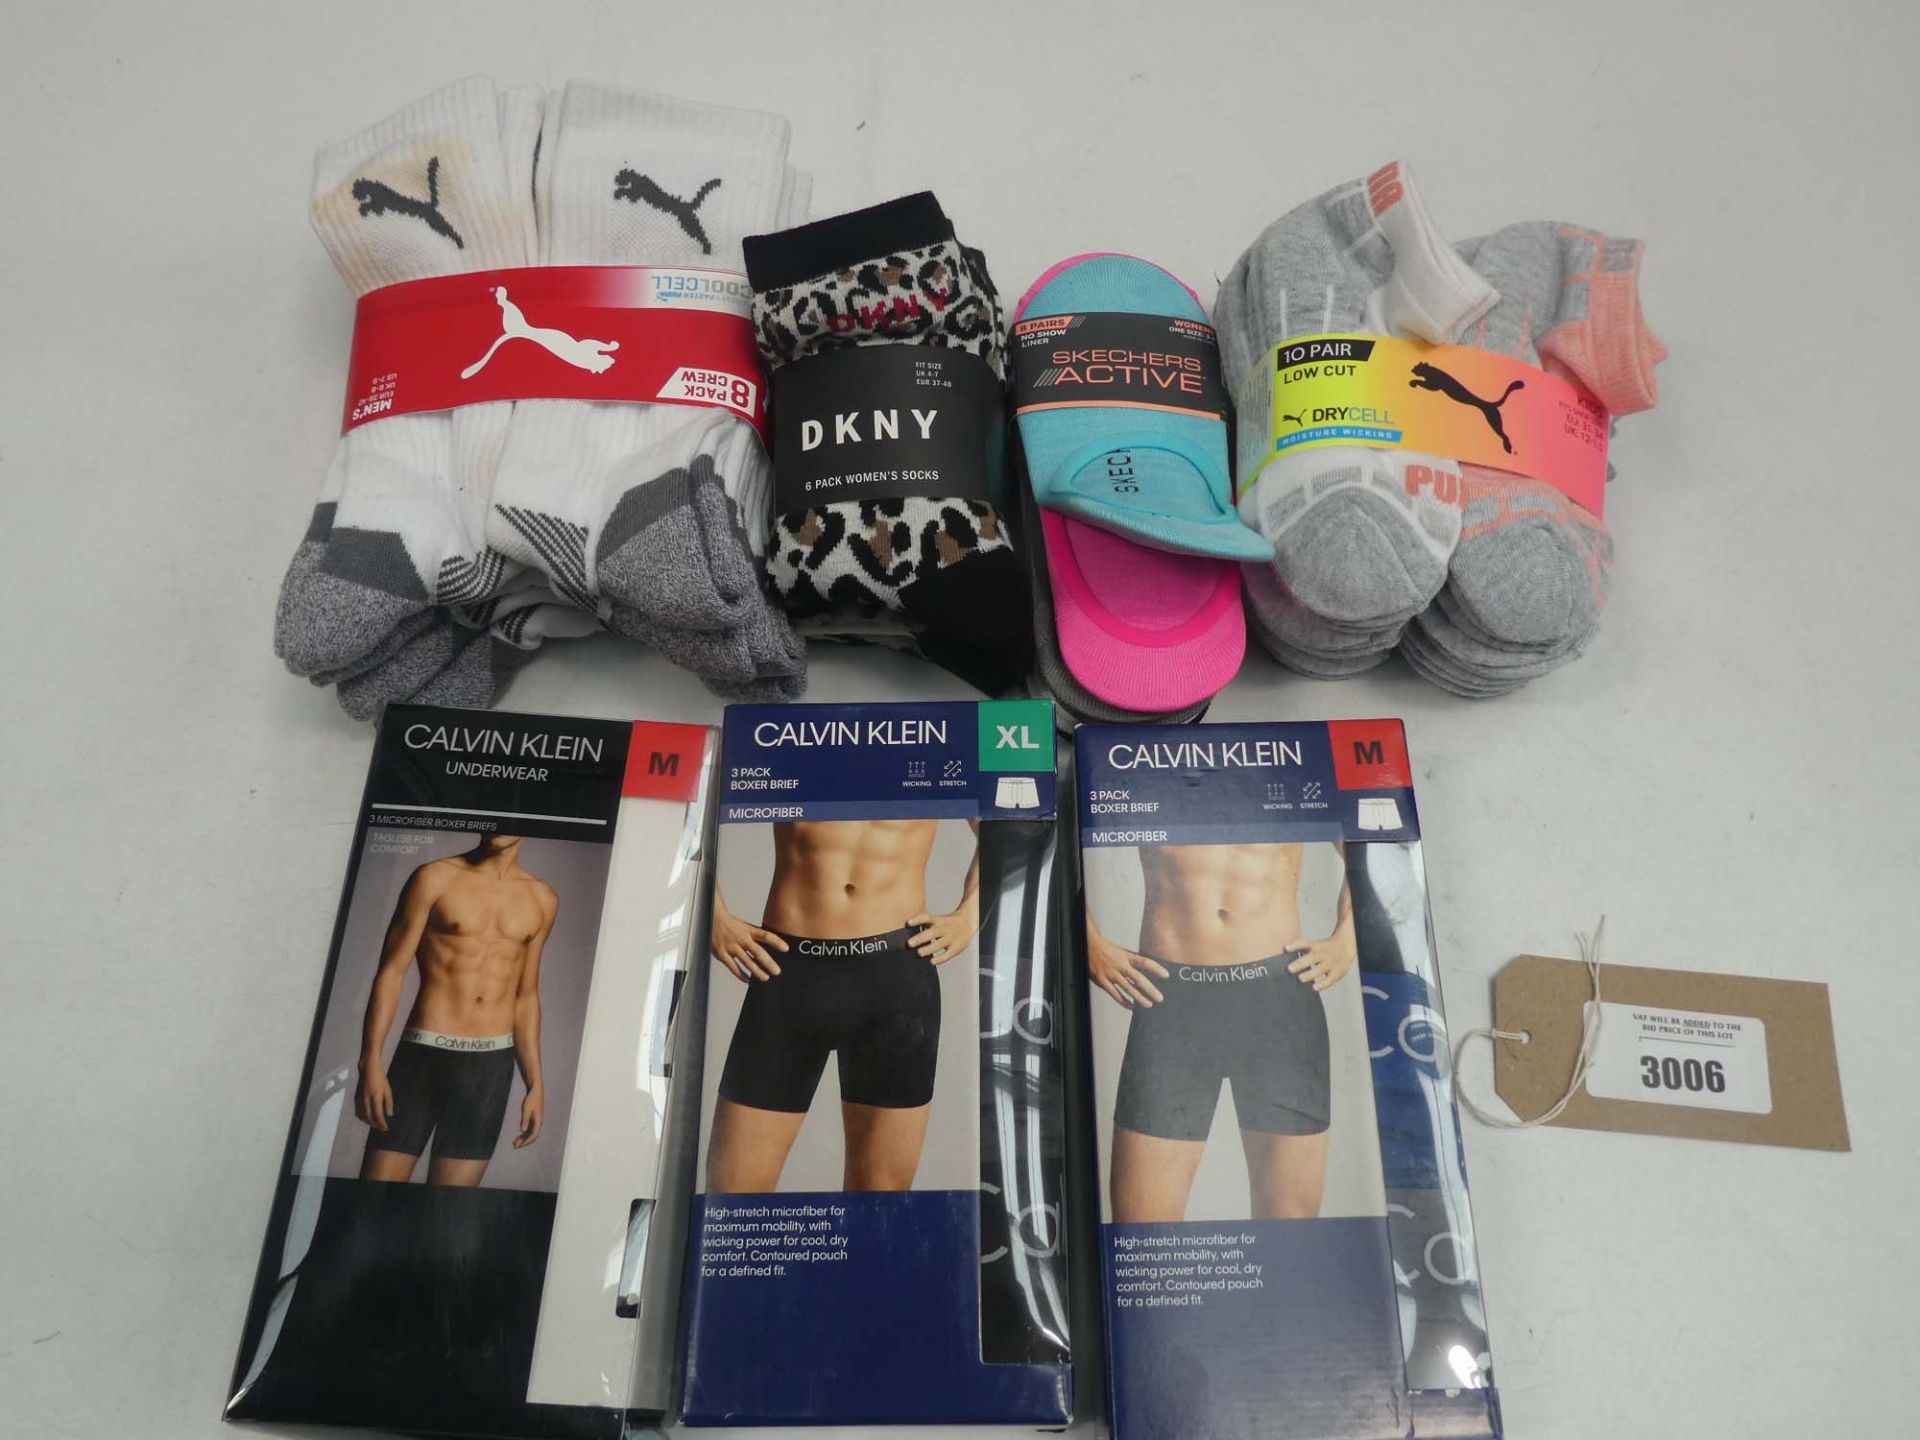 Bag of Calvin Klein underwear and mixed paired socks to include DKNY, Puma and Sketchers